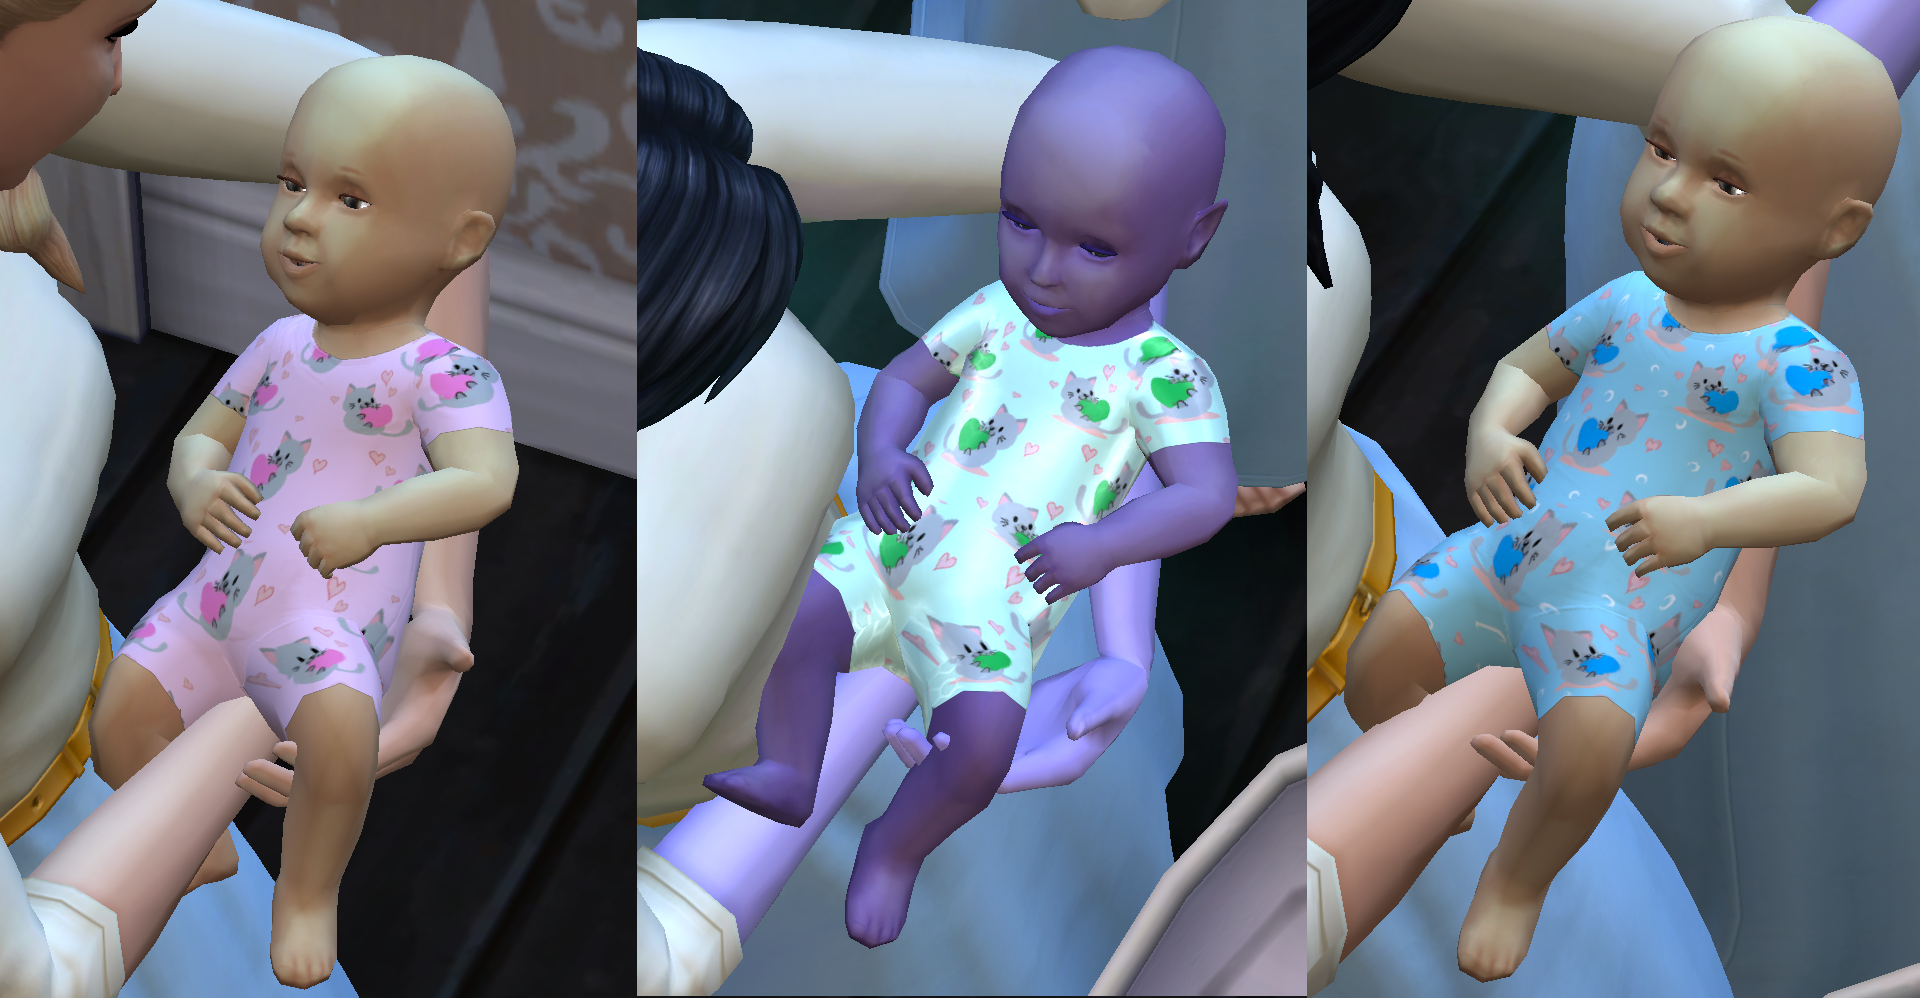 Kitten summer onesie baby outfit - The Sims 4 Mods - CurseForge